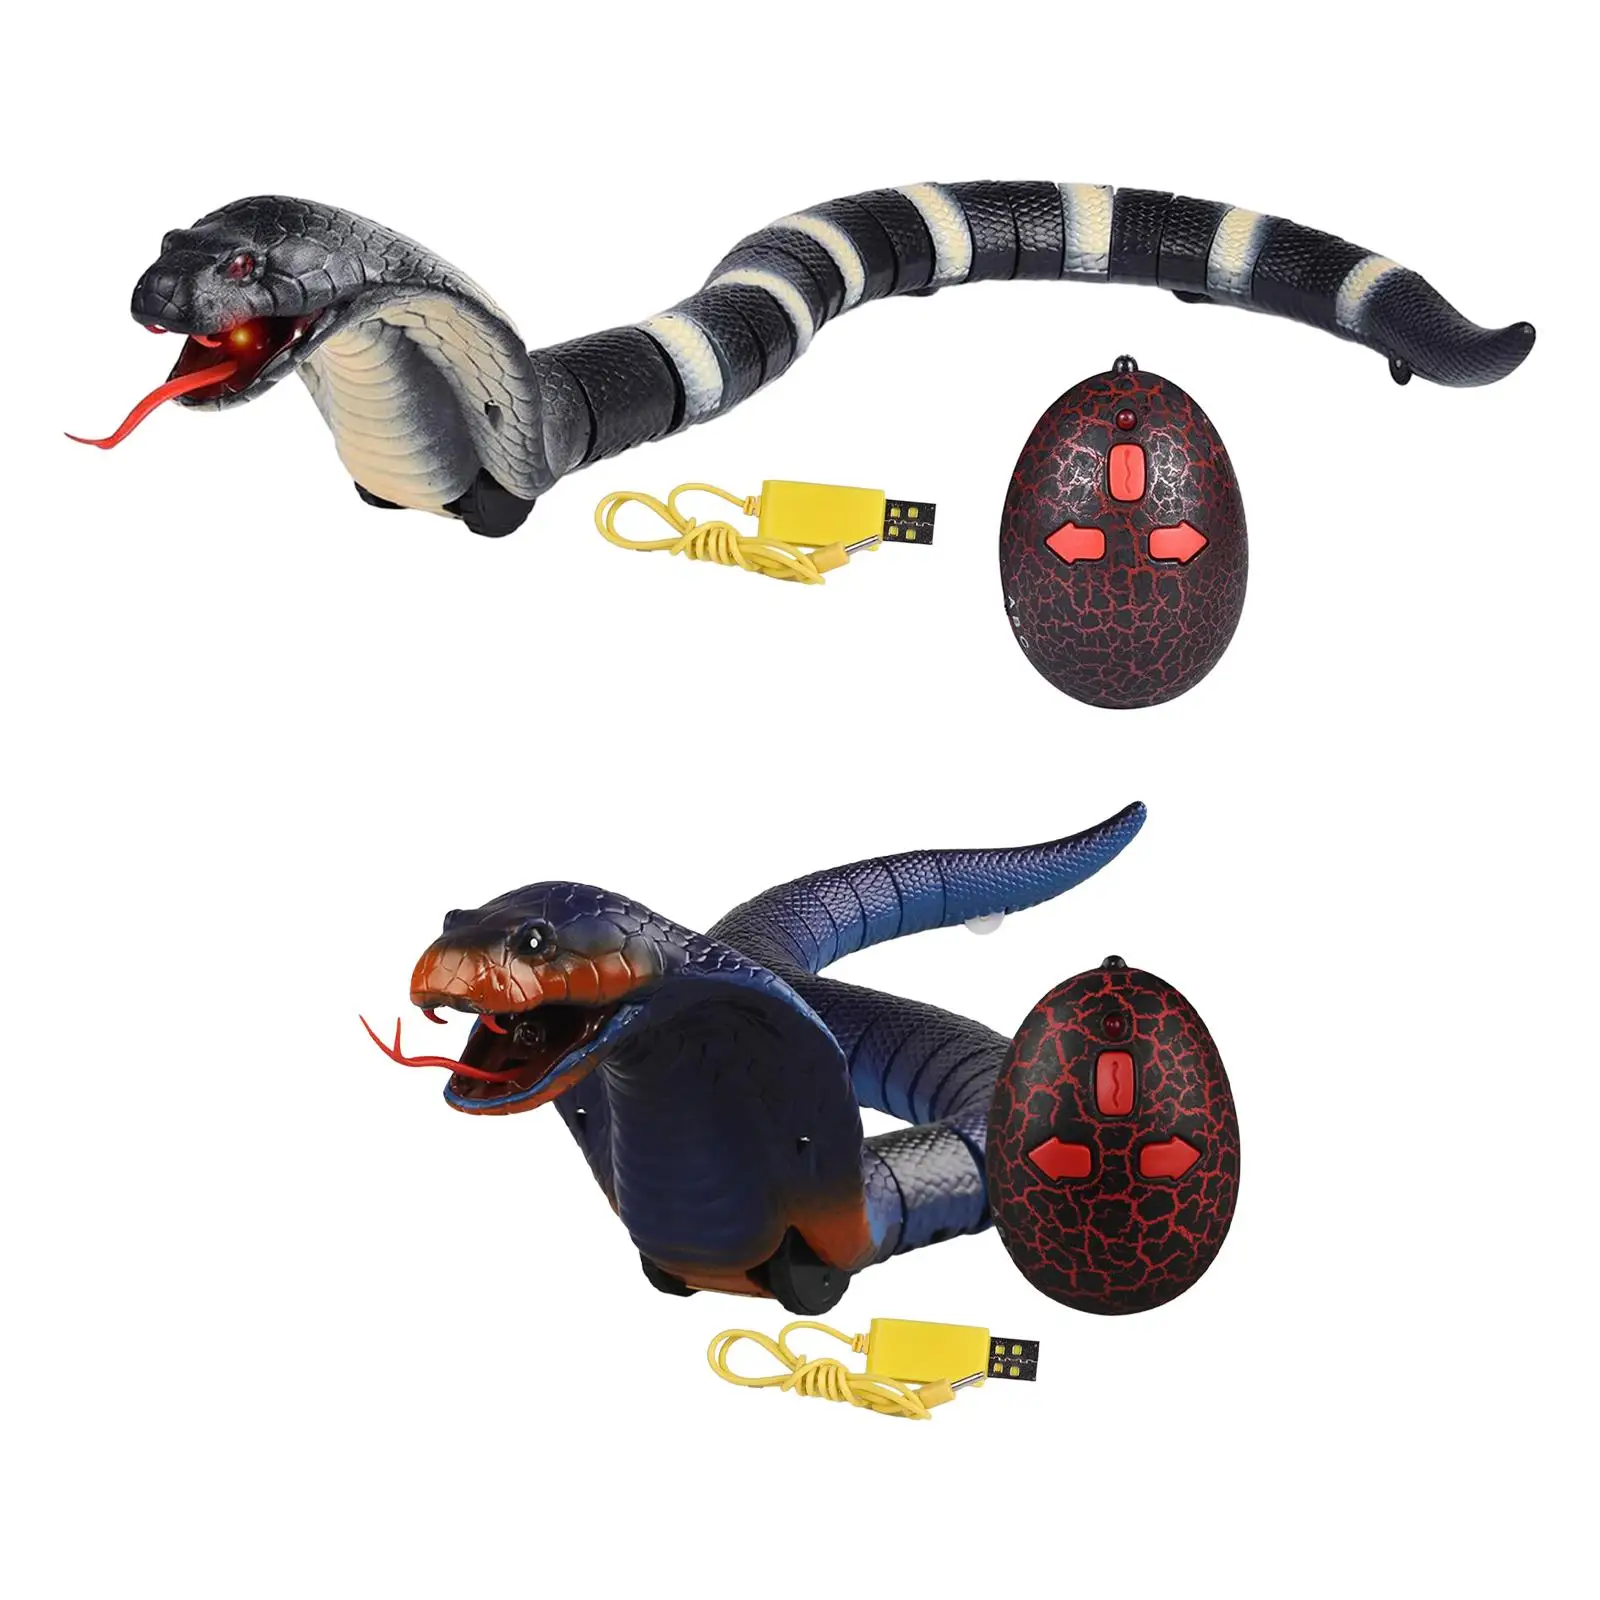 

Rattlesnake Robotic Toy Simulation Joke Remote Control Crawlers Infrared Fast Moving Realistic RC Snake Toy for Birthday Gifts